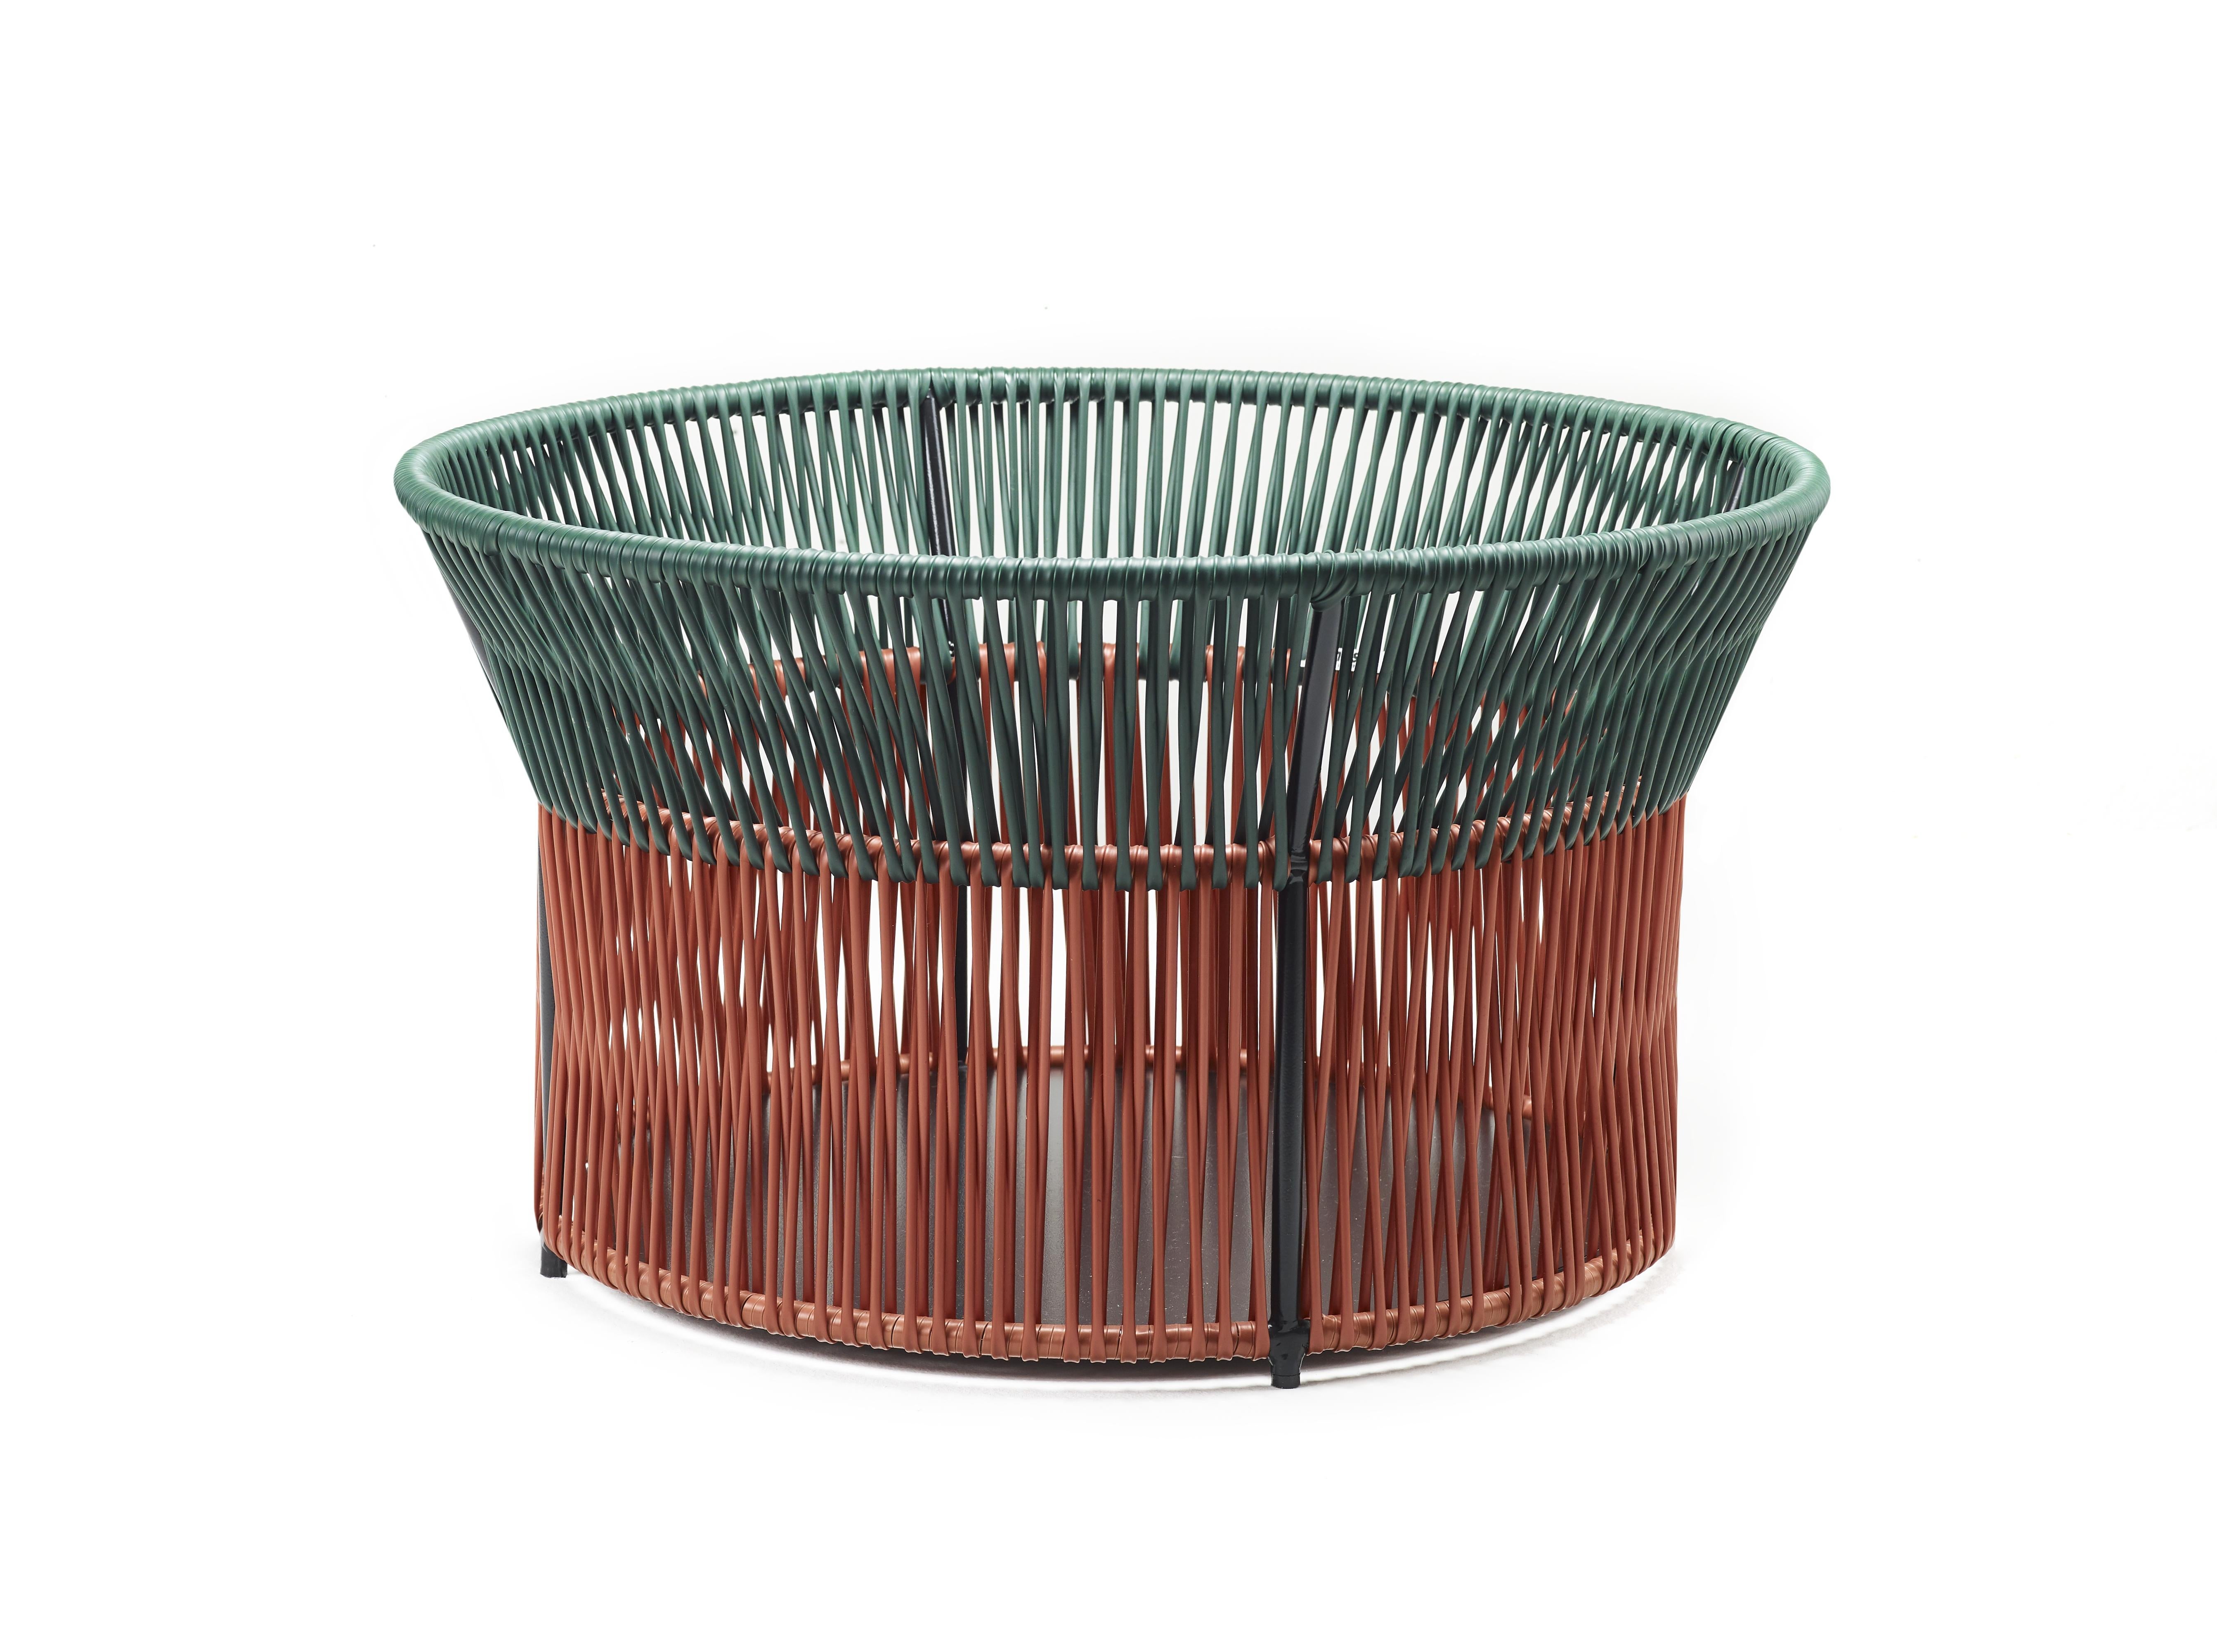 Small Caribe Chic basket 3 by Sebastian Herkner
Materials: Galvanized and powder-coated tubular steel. PVC strings are made from recycled plastic.
Technique: Made from recycled plastic and weaved by local craftspeople in Colombia. 
Dimensions: W